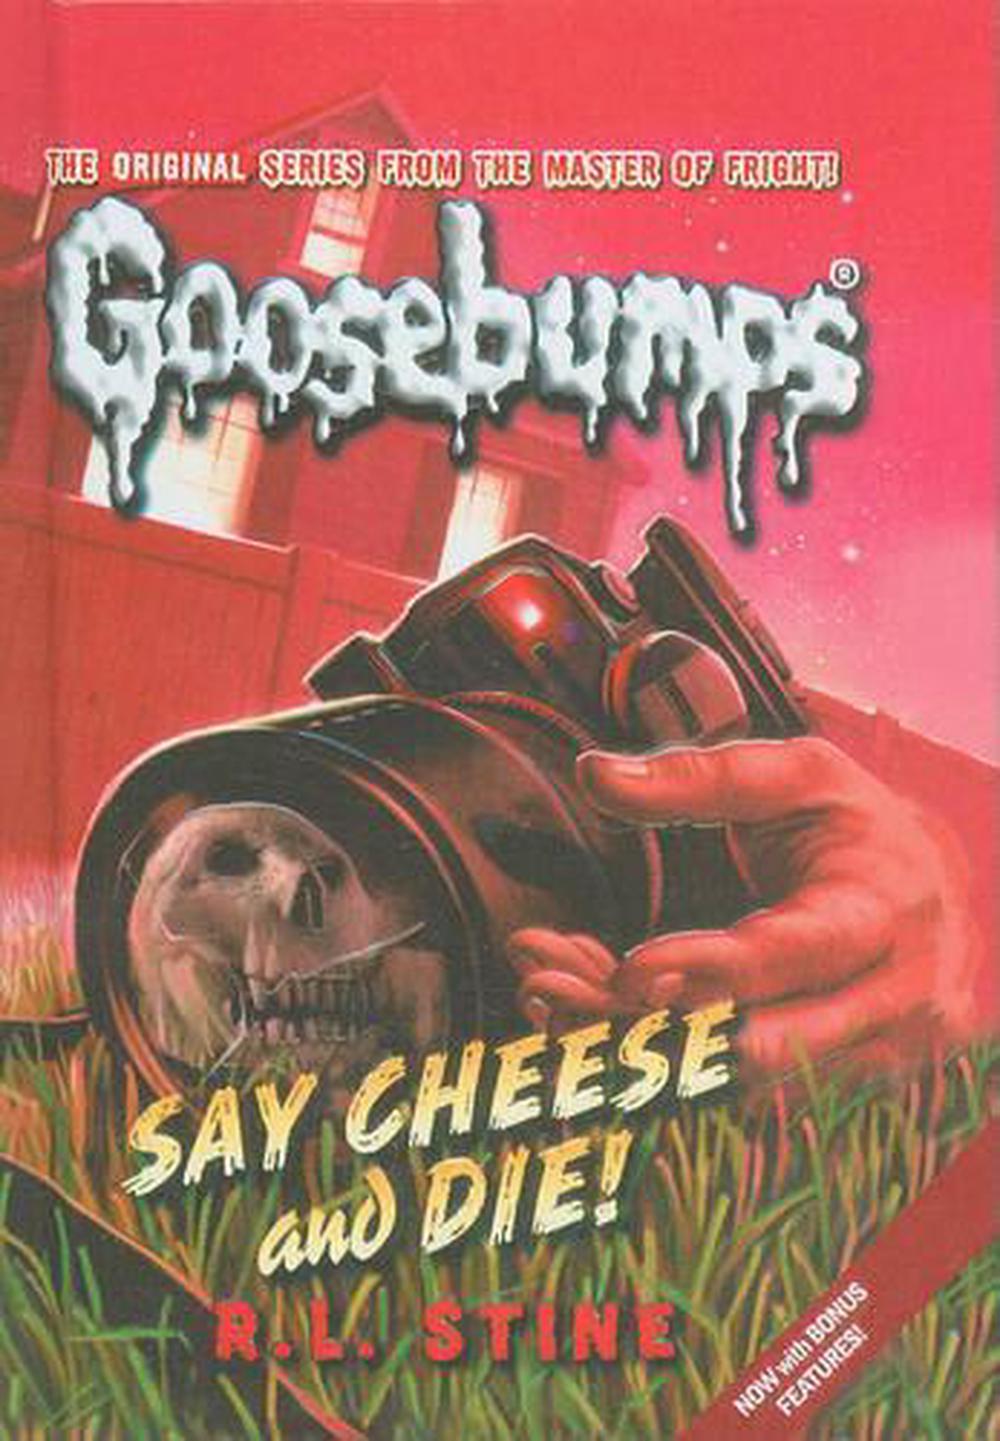 goosebumps books say cheese and die